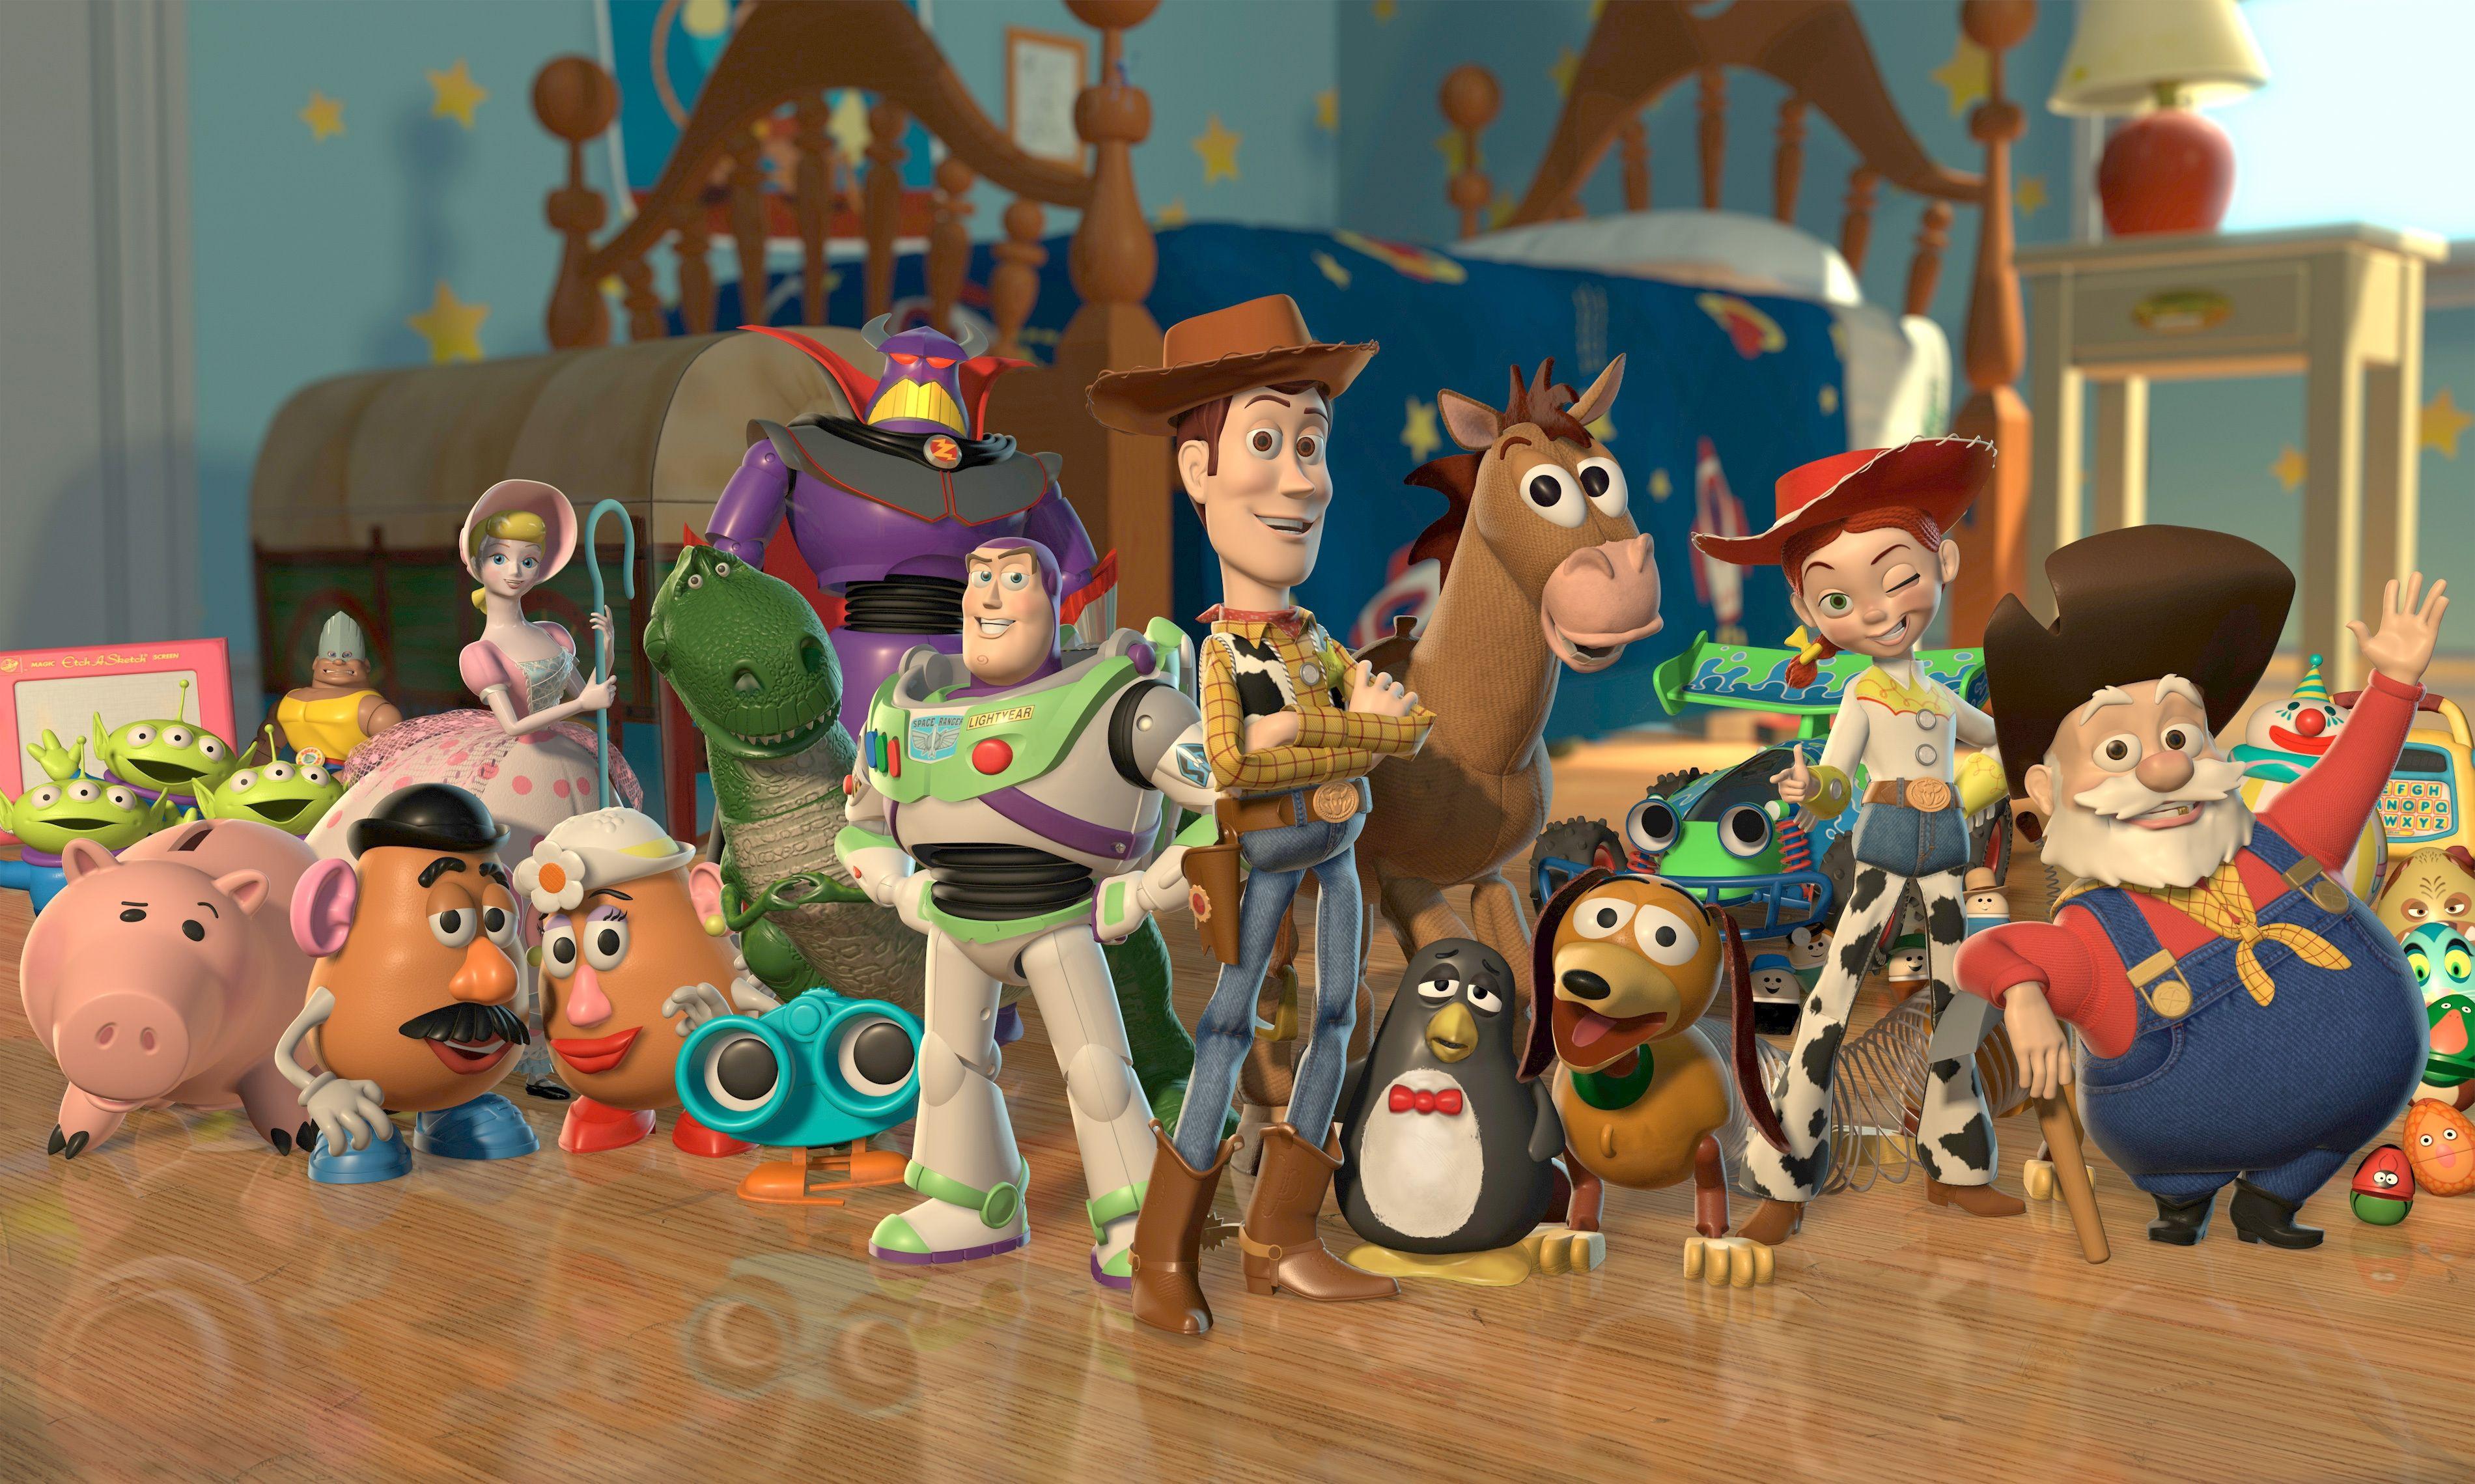 Toy Story Wallpaper Free Toy Story Background